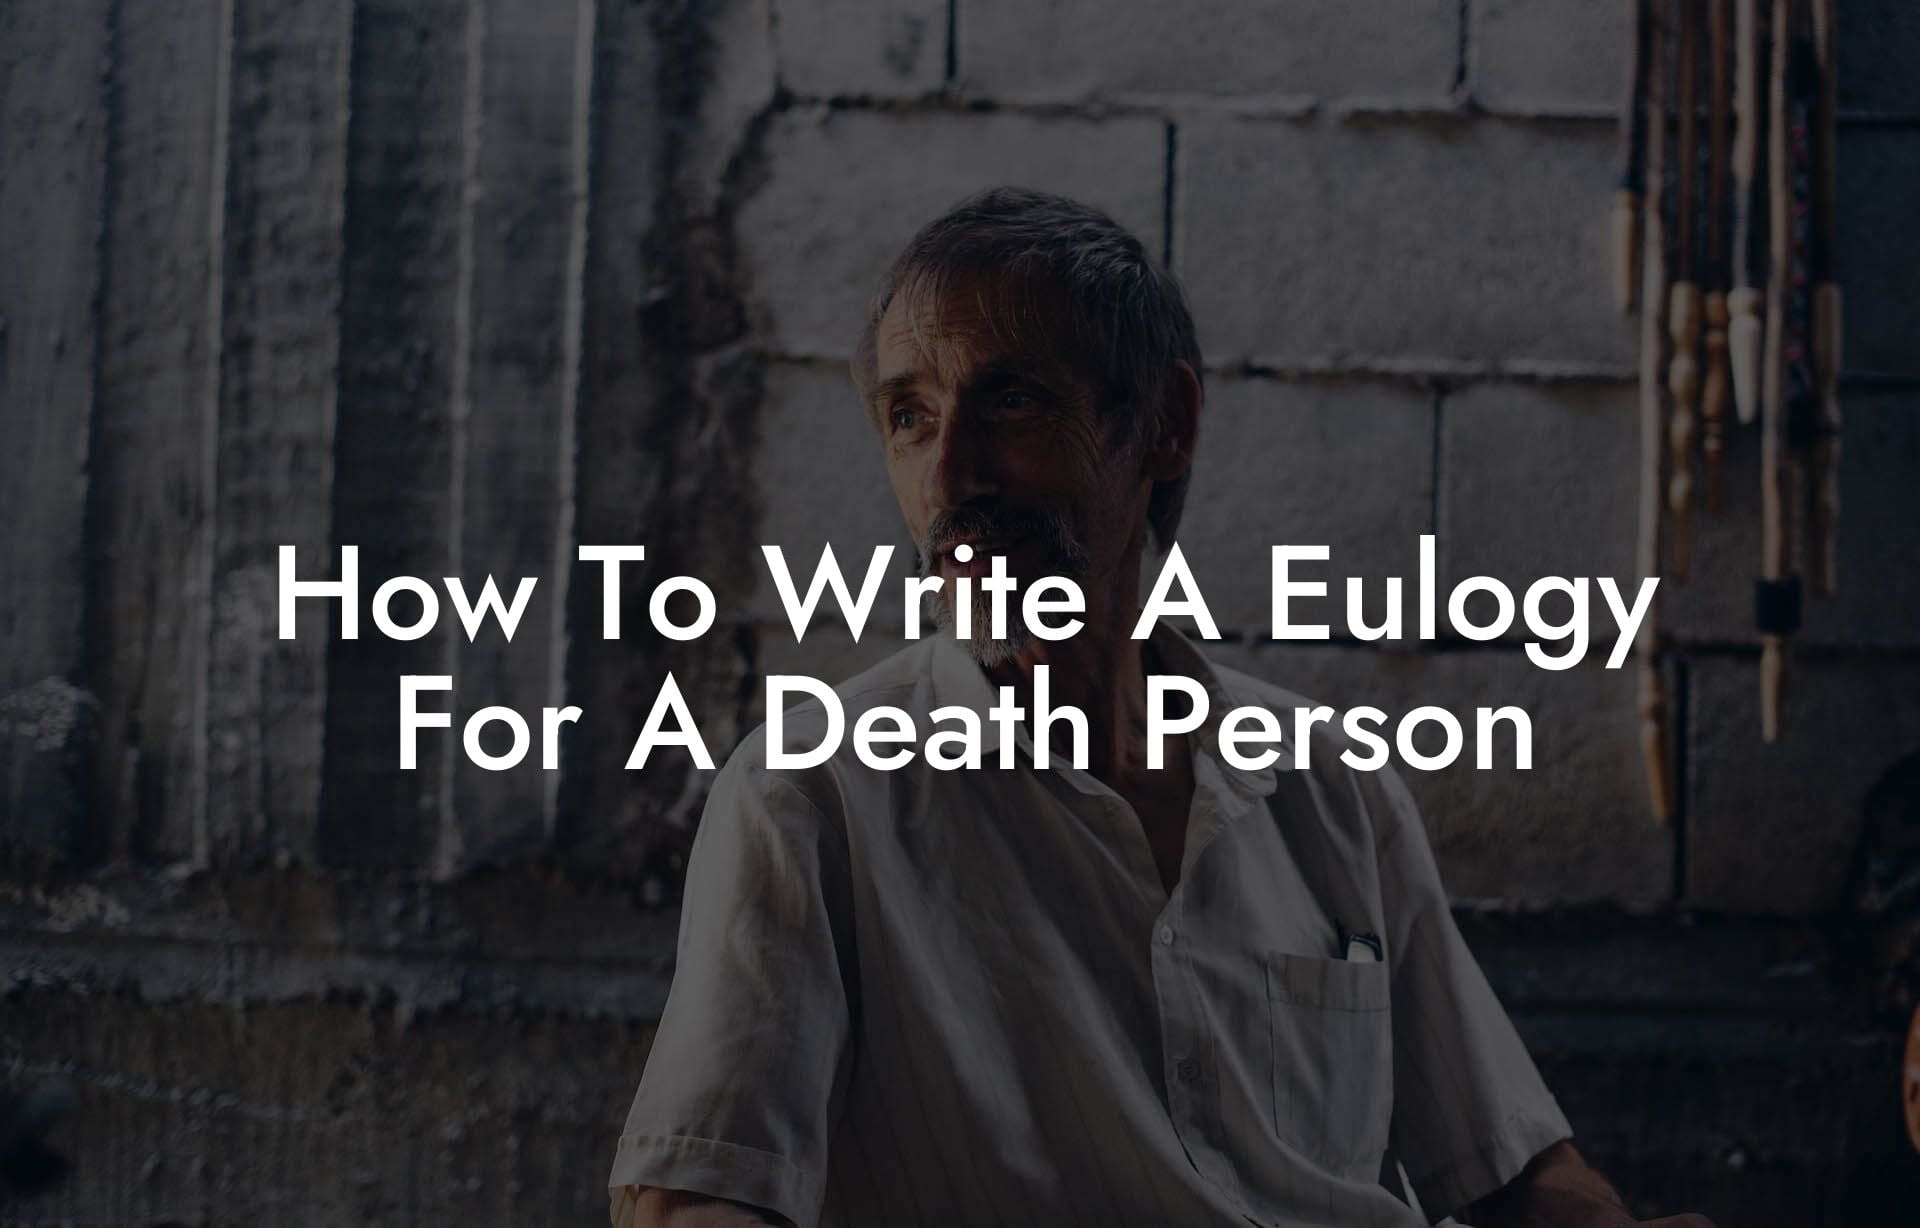 How To Write A Eulogy For A Death Person